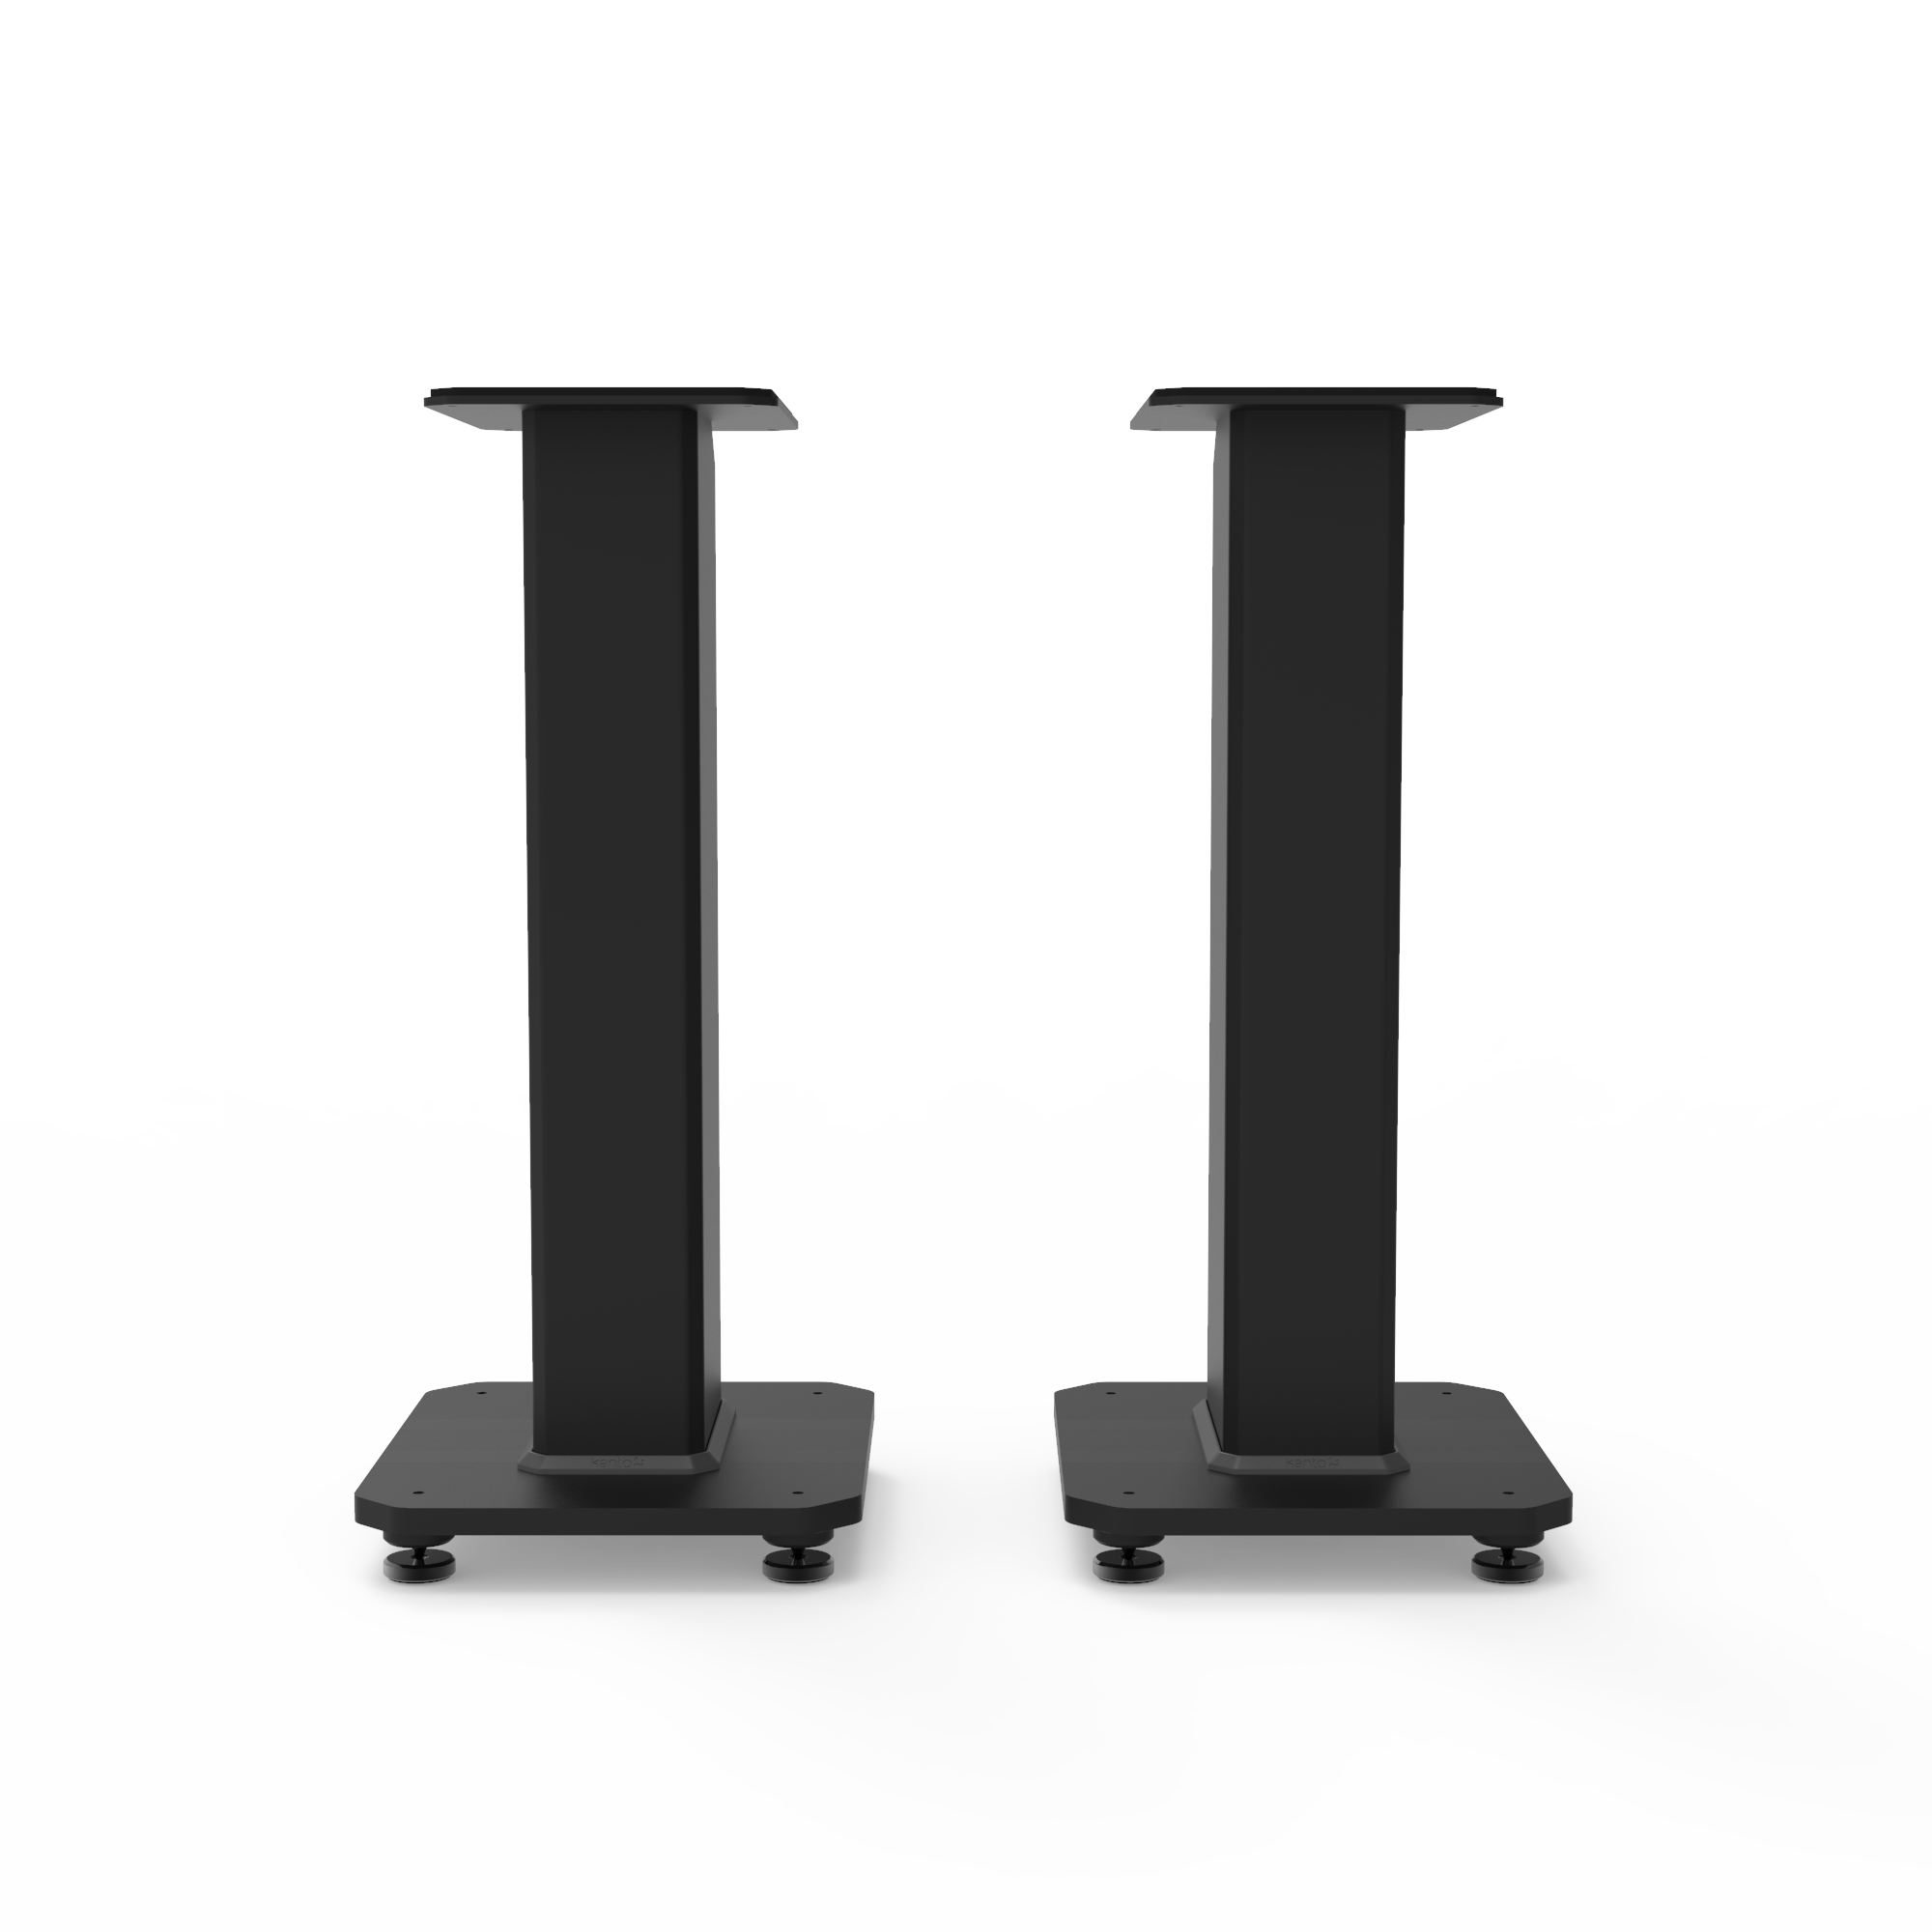 Kanto SX22 22" Tall Fillable Speaker Stands with Isolation Feet - Pair, Black